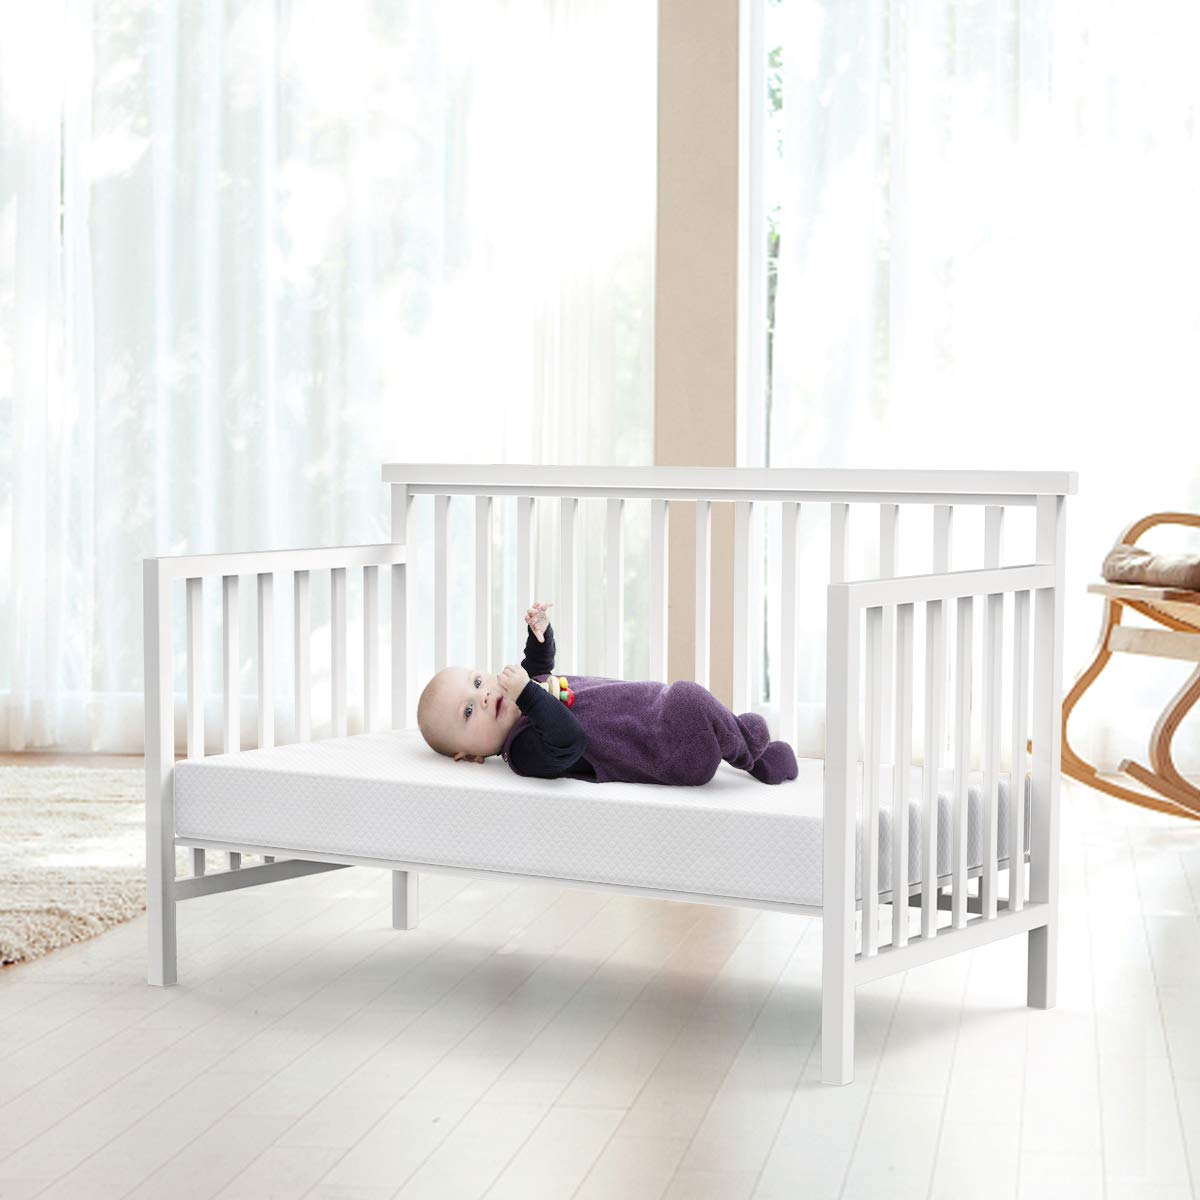 Dourxi Dual Sided Crib and Toddler Mattress, 6 inch 2-in-1 Foam Baby Mattress for Standard Size Crib, White